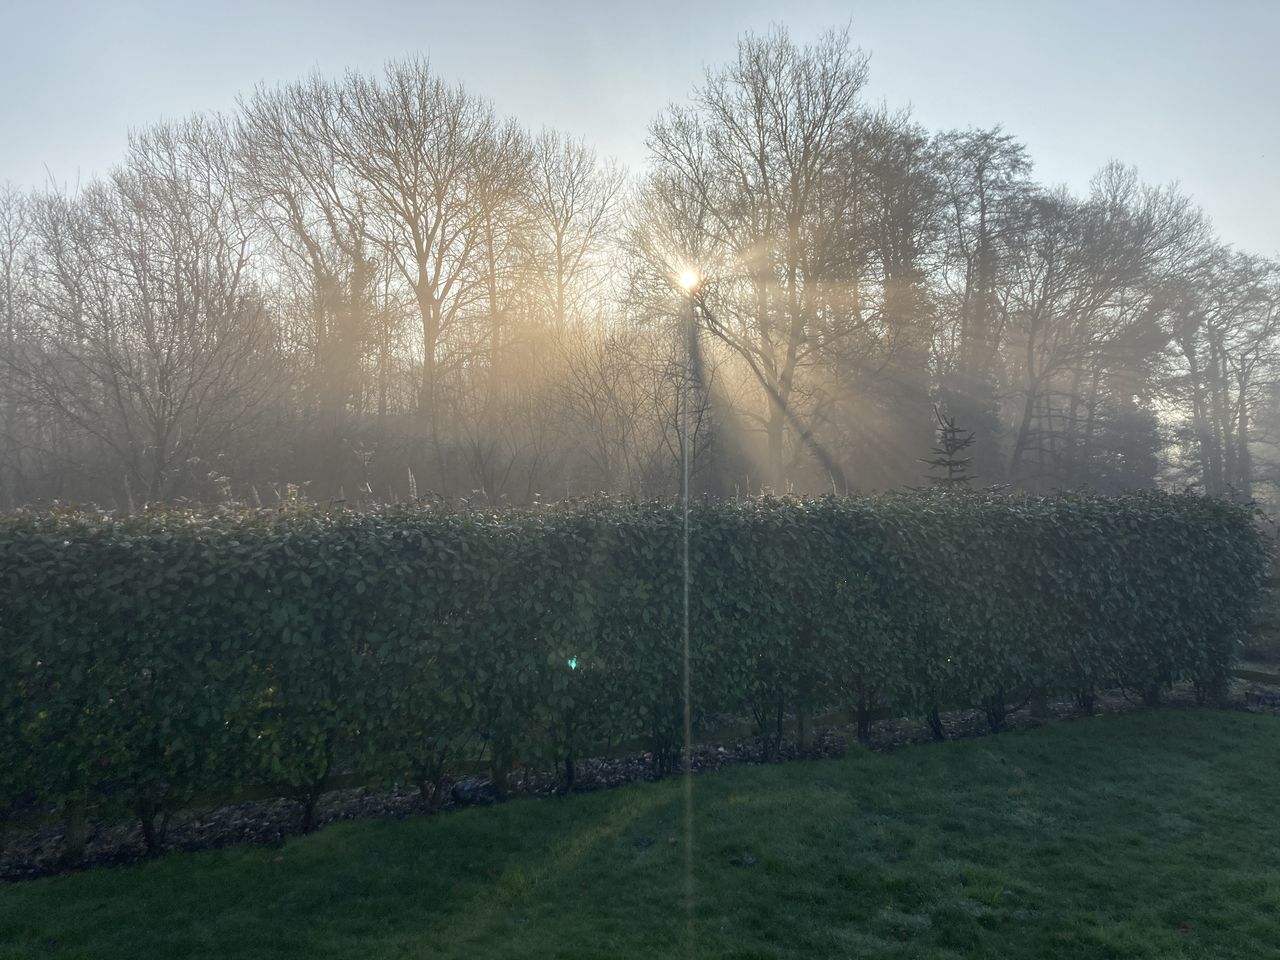 plant, tree, morning, nature, grass, sunlight, mist, sky, tranquility, environment, beauty in nature, land, landscape, no people, field, rural area, tranquil scene, growth, scenics - nature, hill, fog, outdoors, green, rural scene, light, idyllic, agriculture, day, sun, leaf, bare tree, non-urban scene, dawn